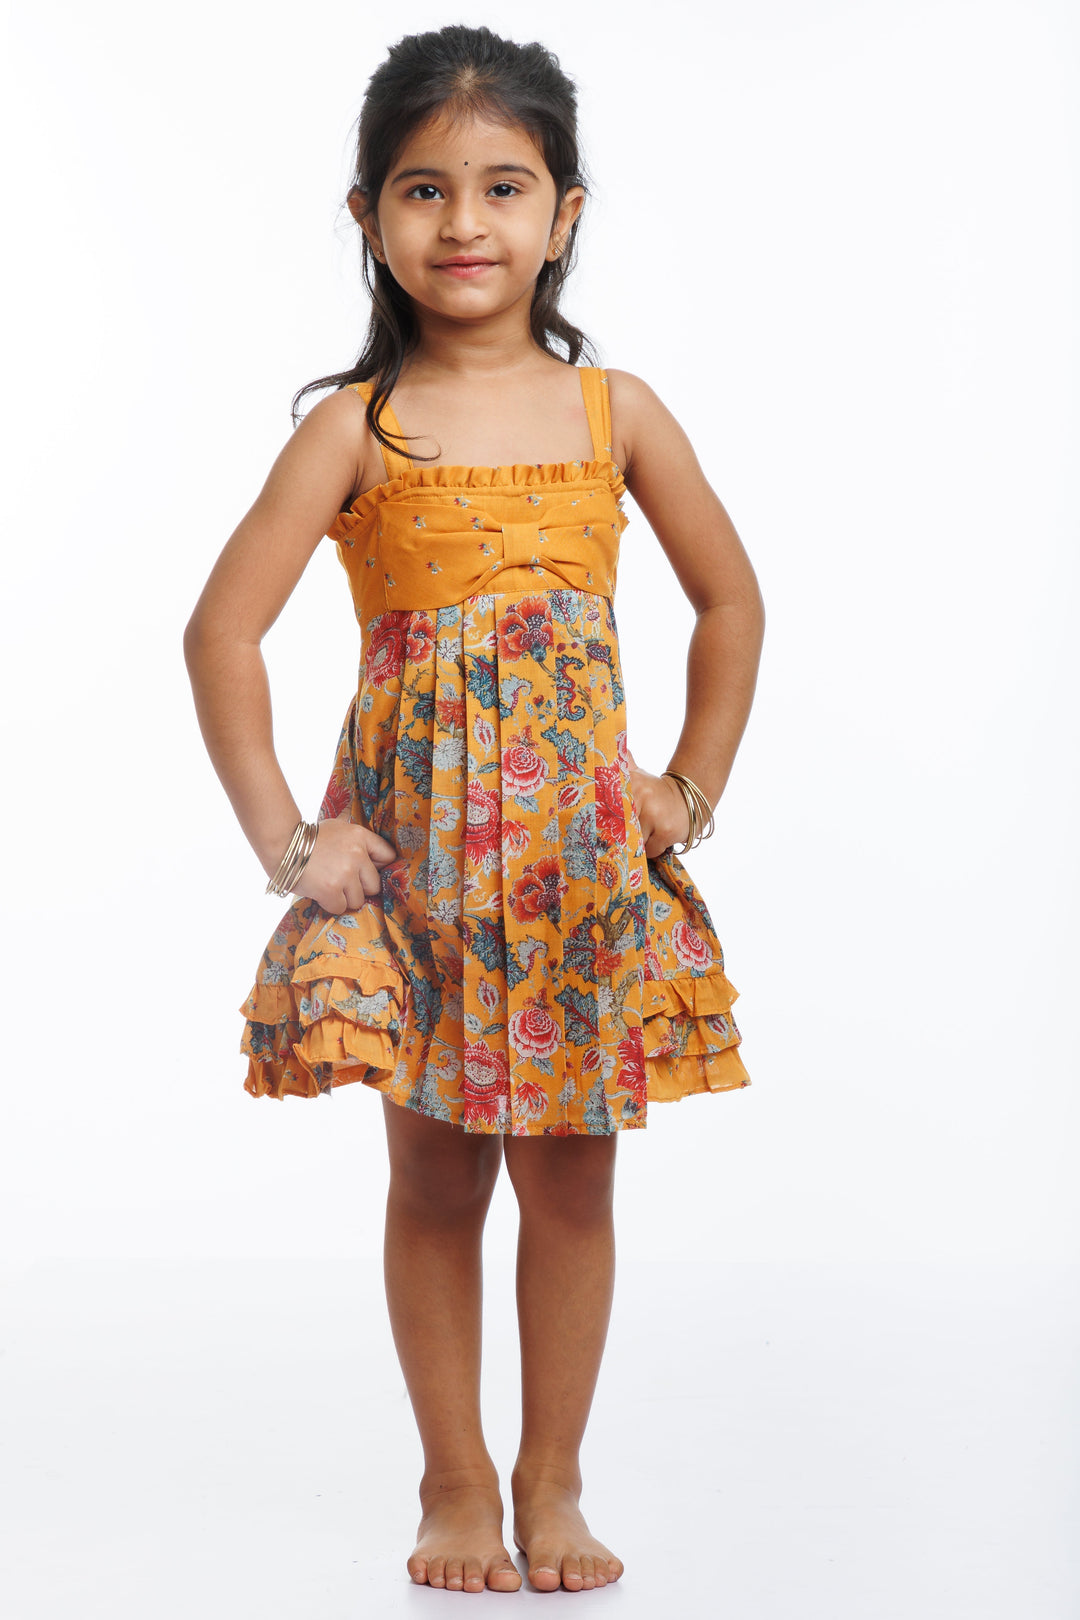 The Nesavu Girls Cotton Frock Sunny Floral Sleeveless Cotton Frock for Girls Nesavu 14 (6M) / Yellow / Cotton GFC1271A-14 Mustard Floral Printed Cotton Dress for Girls | Summer Chic Sleeveless Frock | The Nesavu